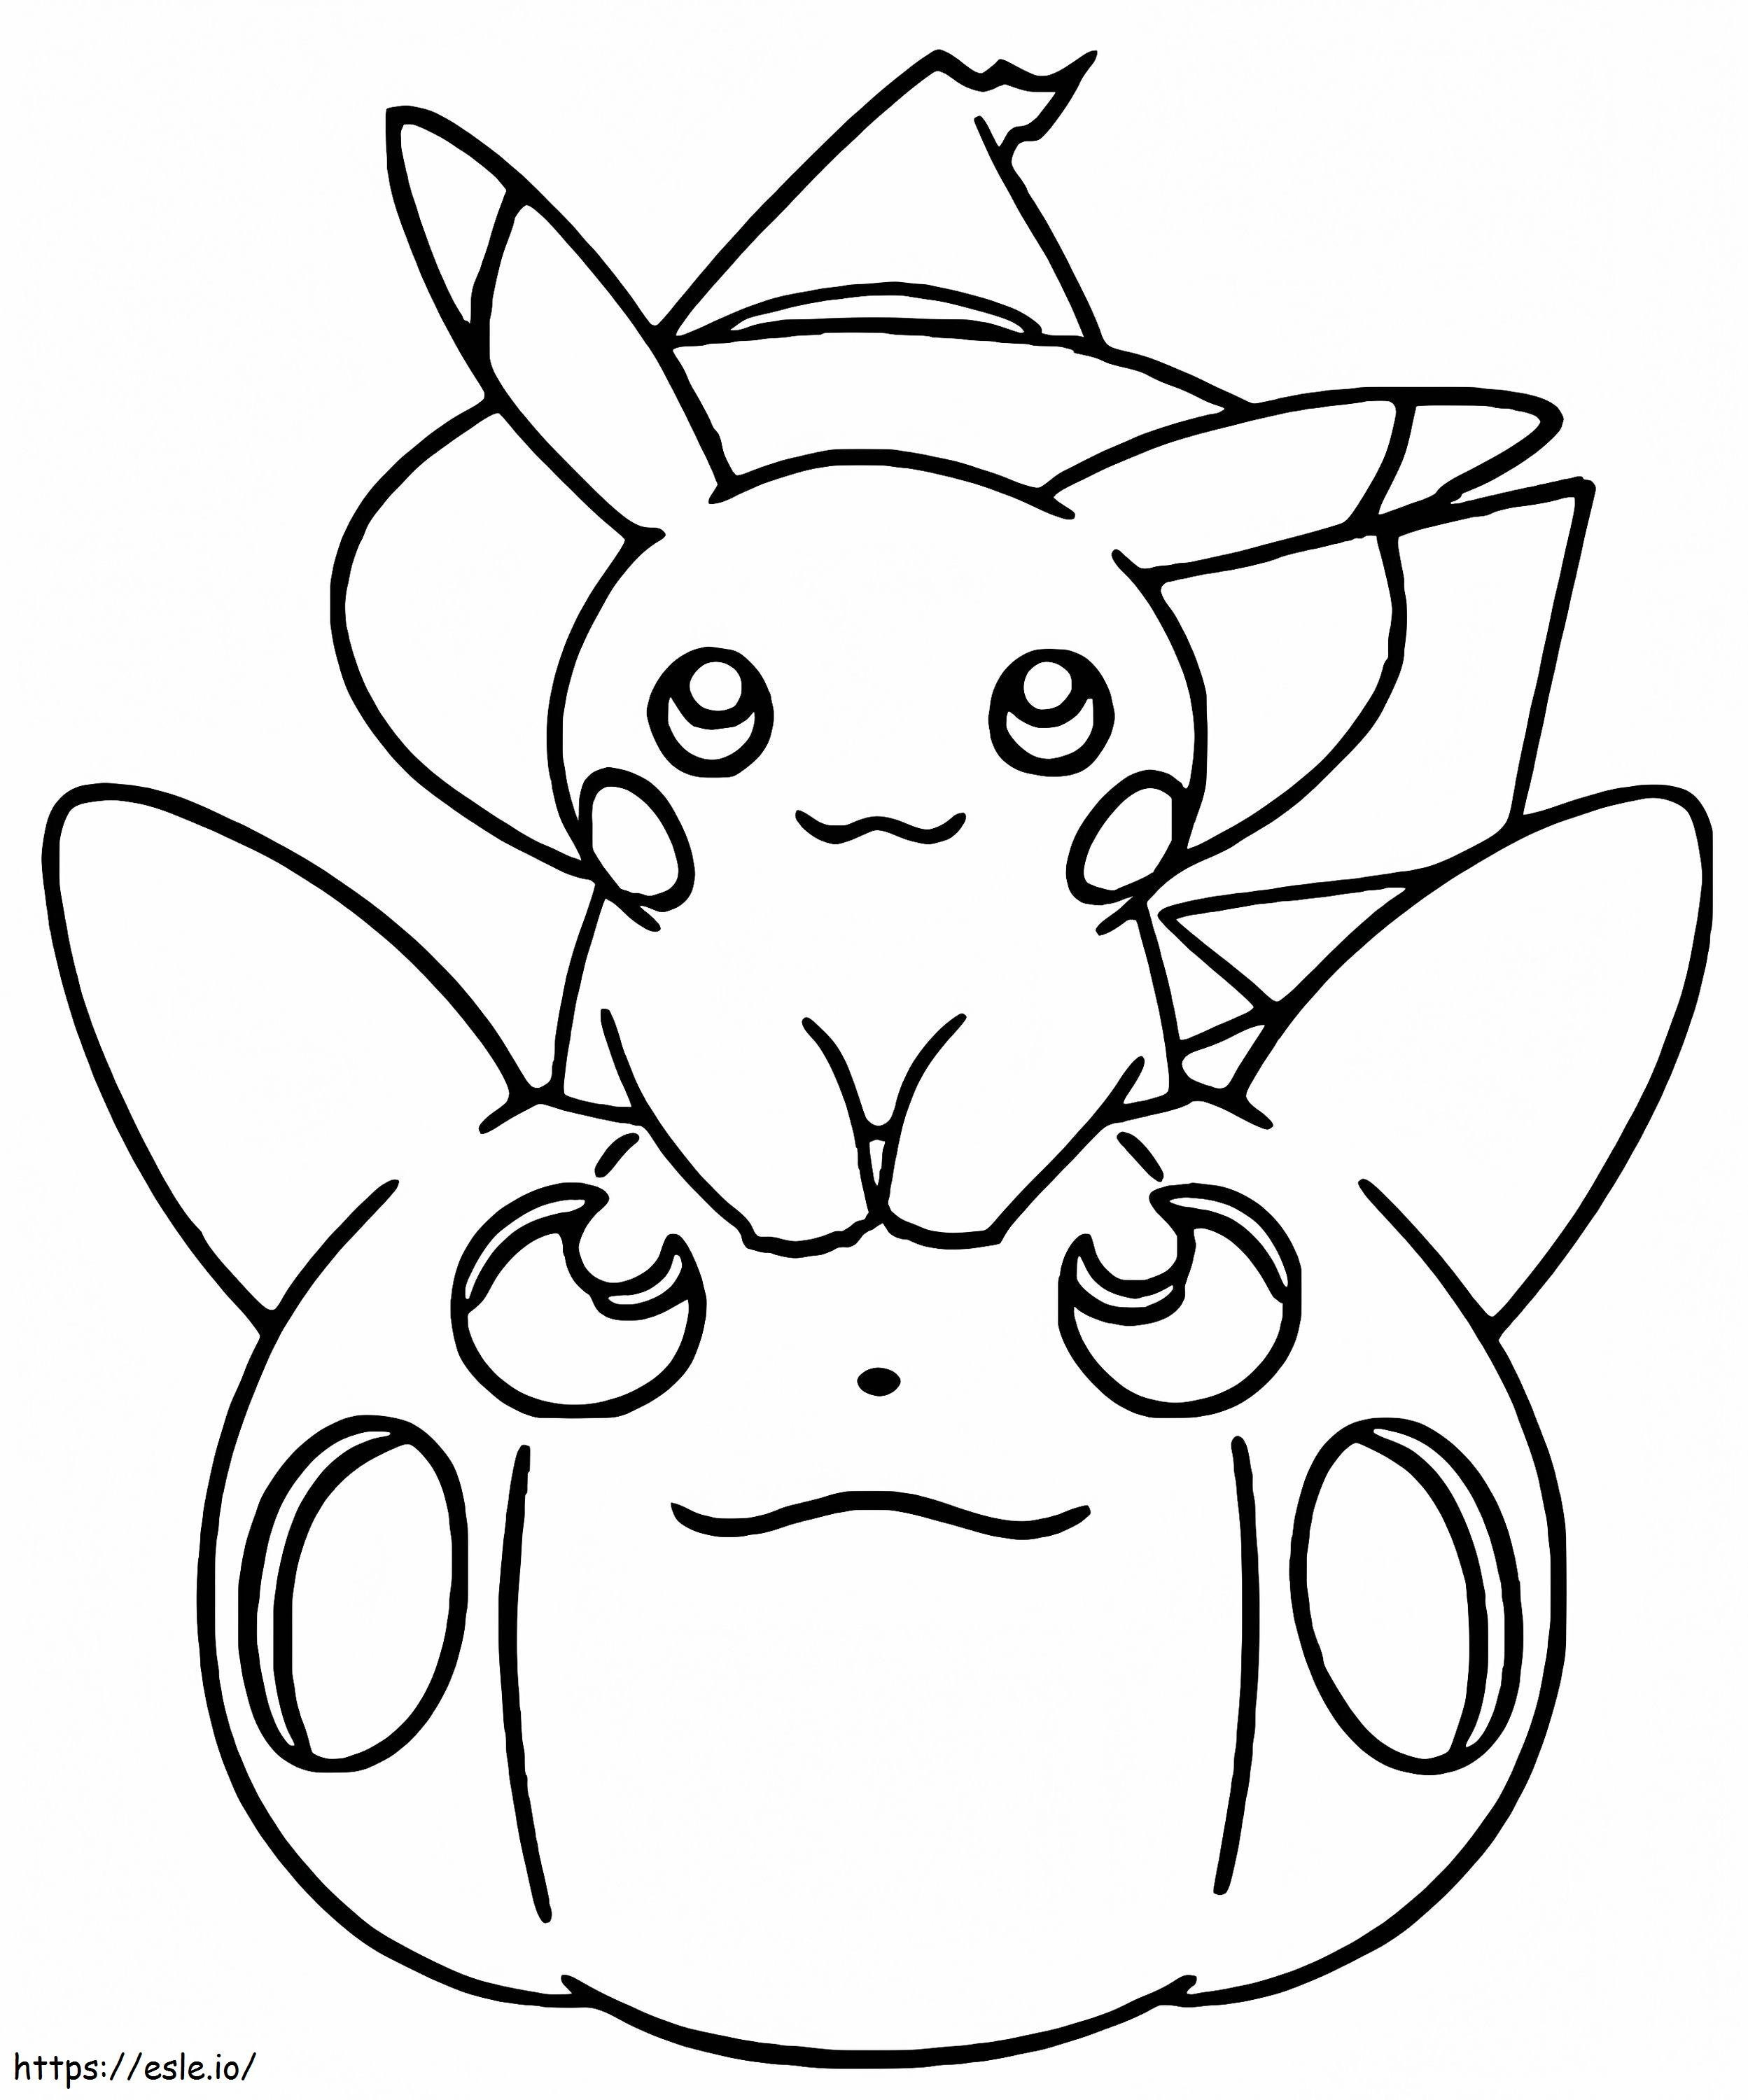 Cute Pikachu Halloween coloring page